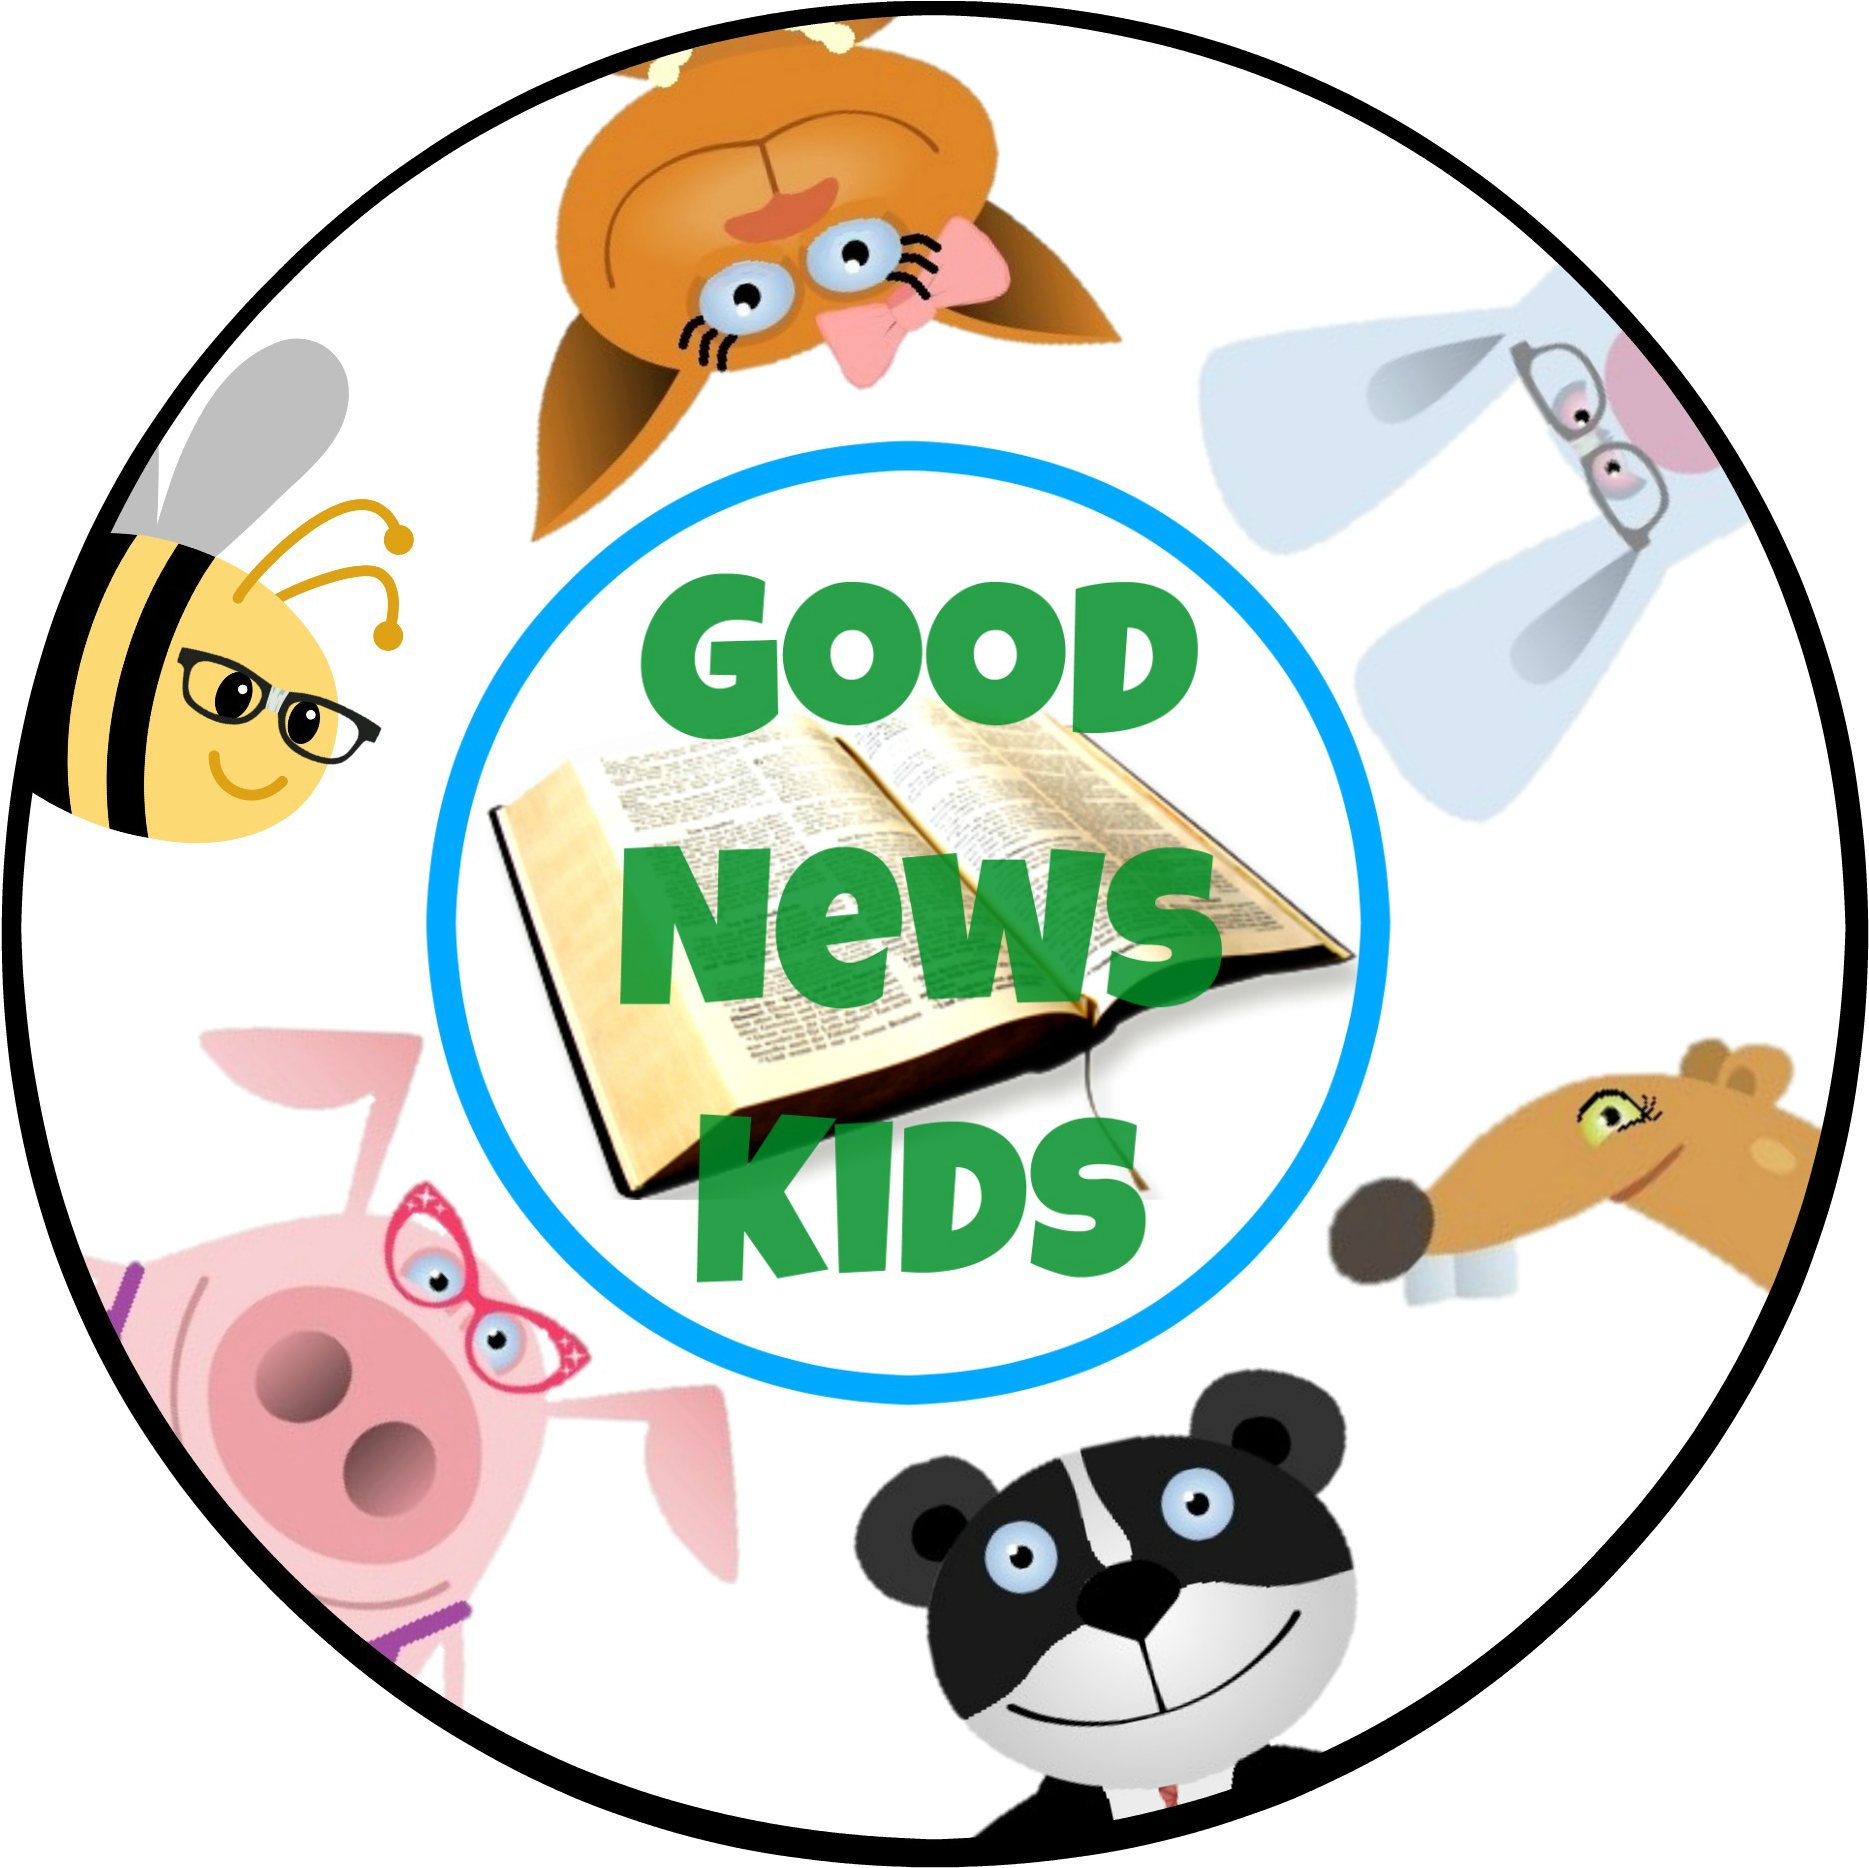 School Projects Of Good News Kids Is A - Evangelism (2000x2000)